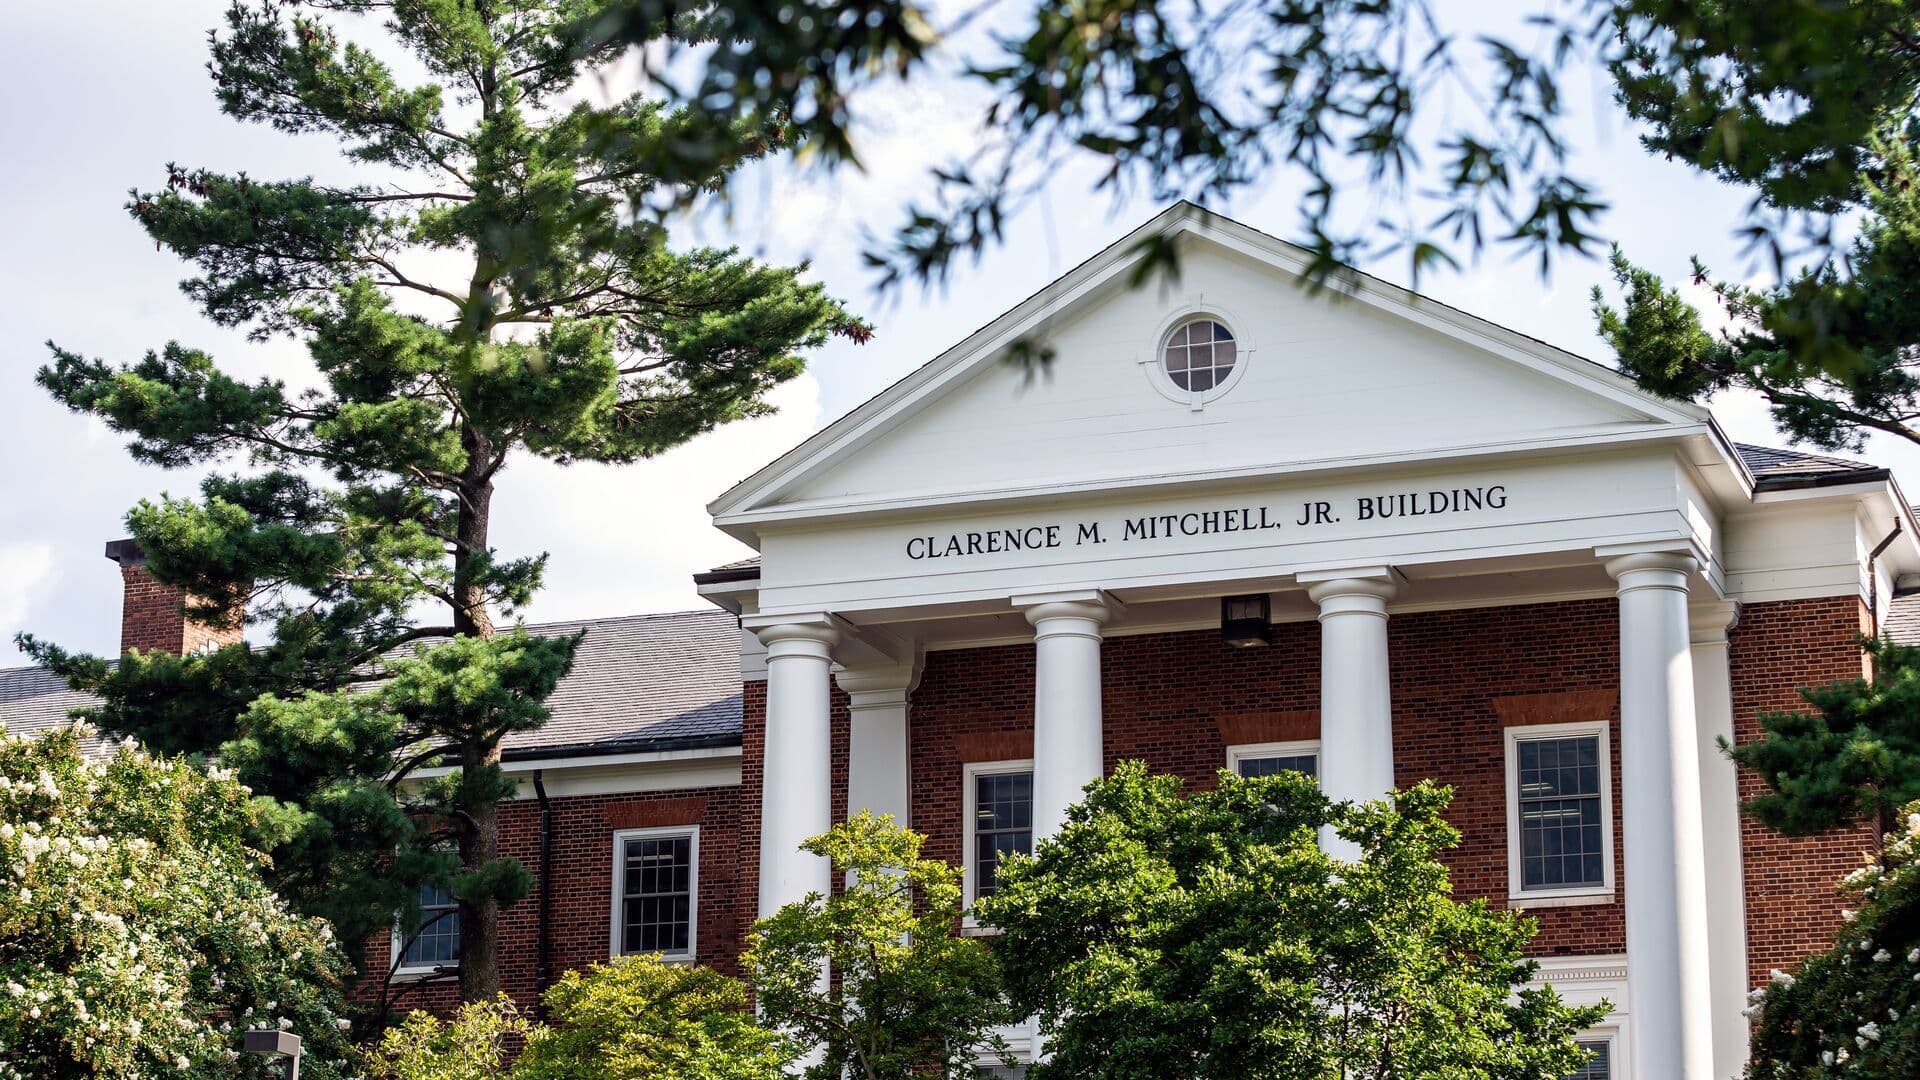 Clarence M. Mitchell Jr. Building